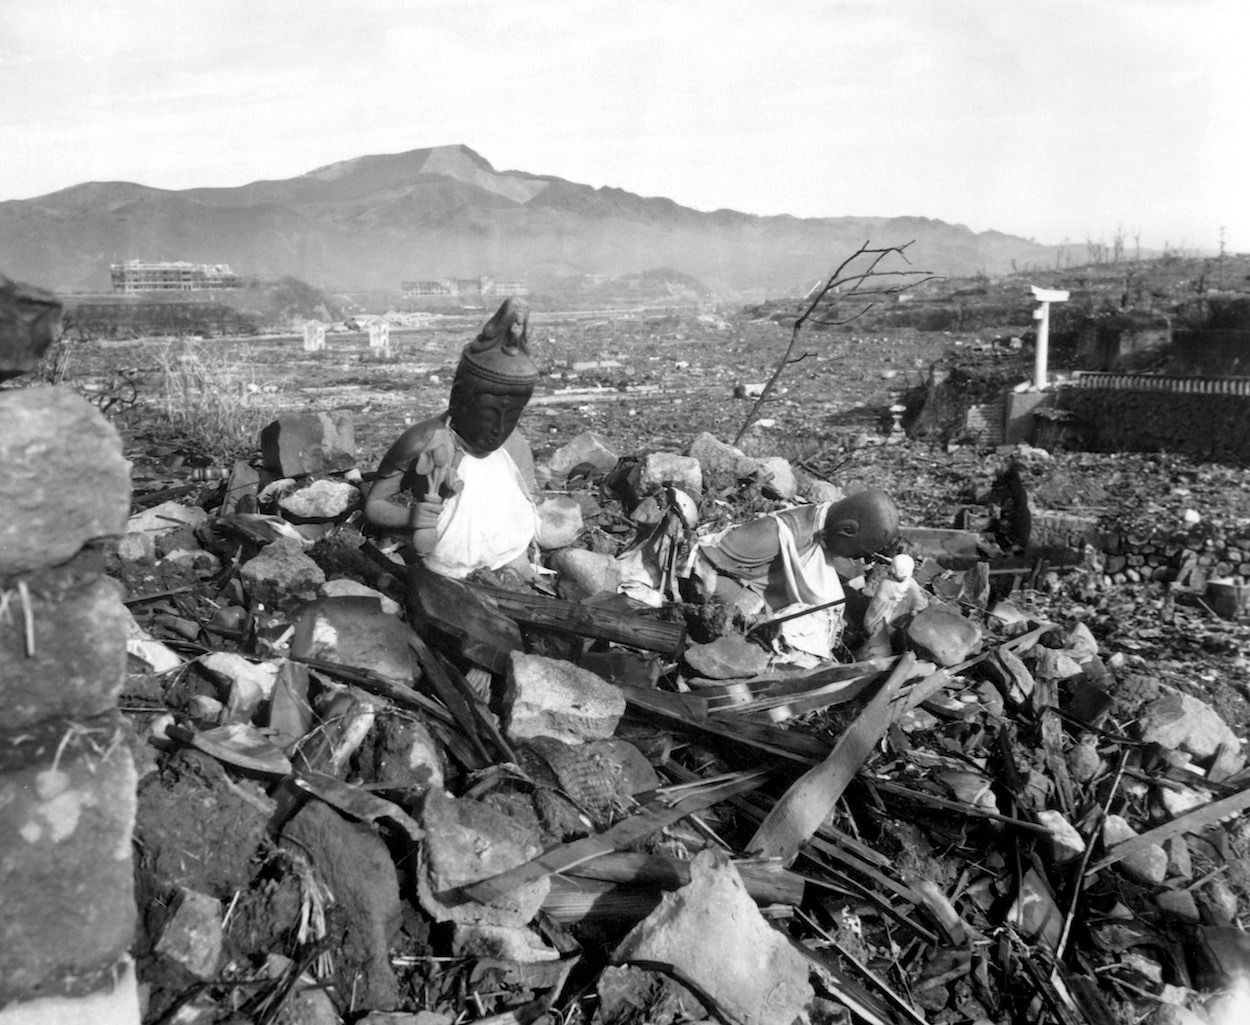 Battered religious figures stand watch on a hill above a tattered valley. Nagasaki, Japan. September 24, 1945. Cpl. Lynn P. Walker, Jr. (Marine Corps) NARA FILE #: 127-N-136176 WAR & CONFLICT BOOK #: 1241